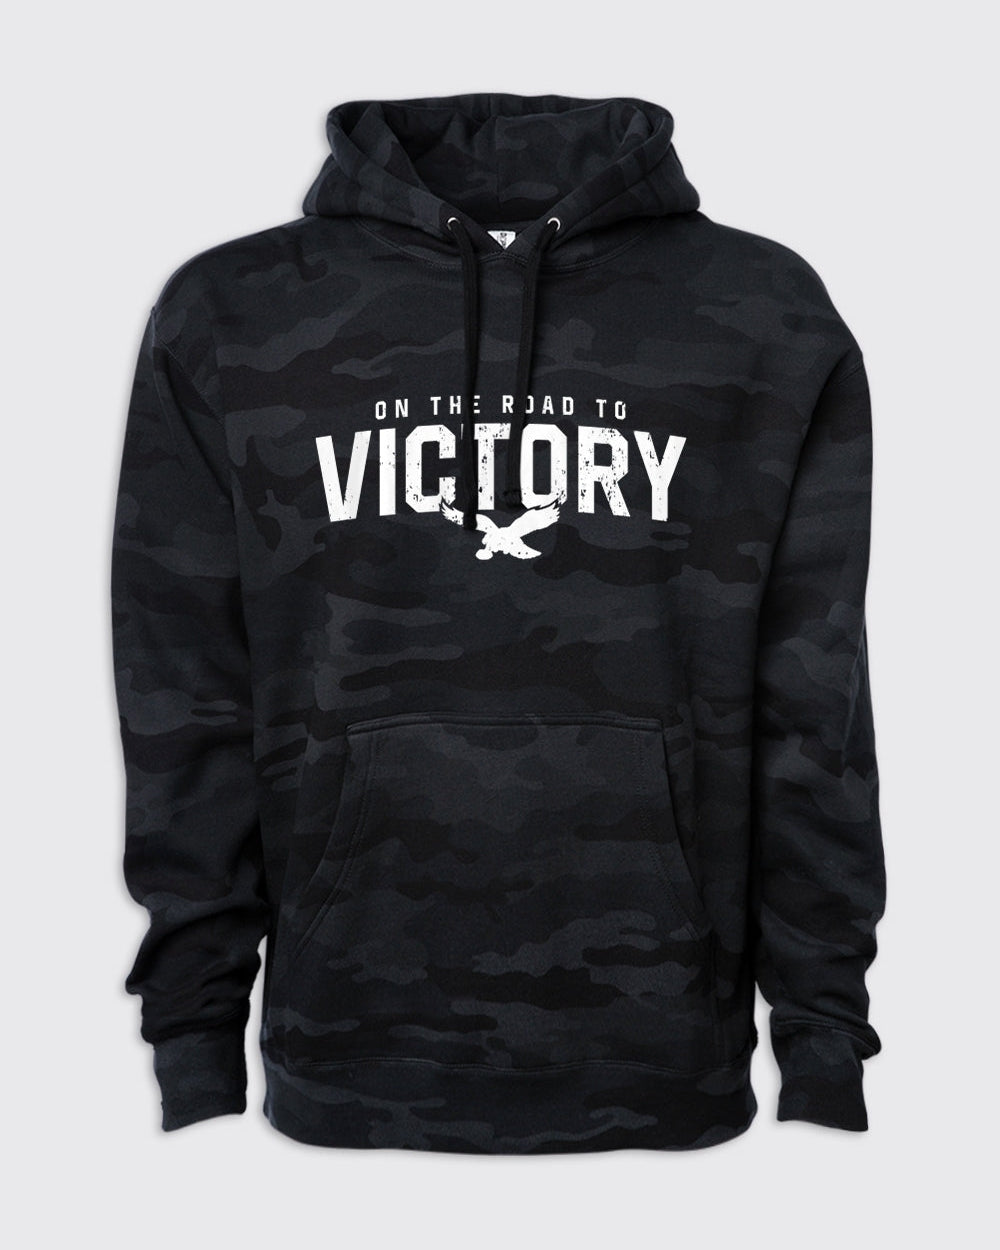 Limited Edition On The Road To Victory Camo Hoodie - Eagles, Hoodies - Philly Sports Shirts